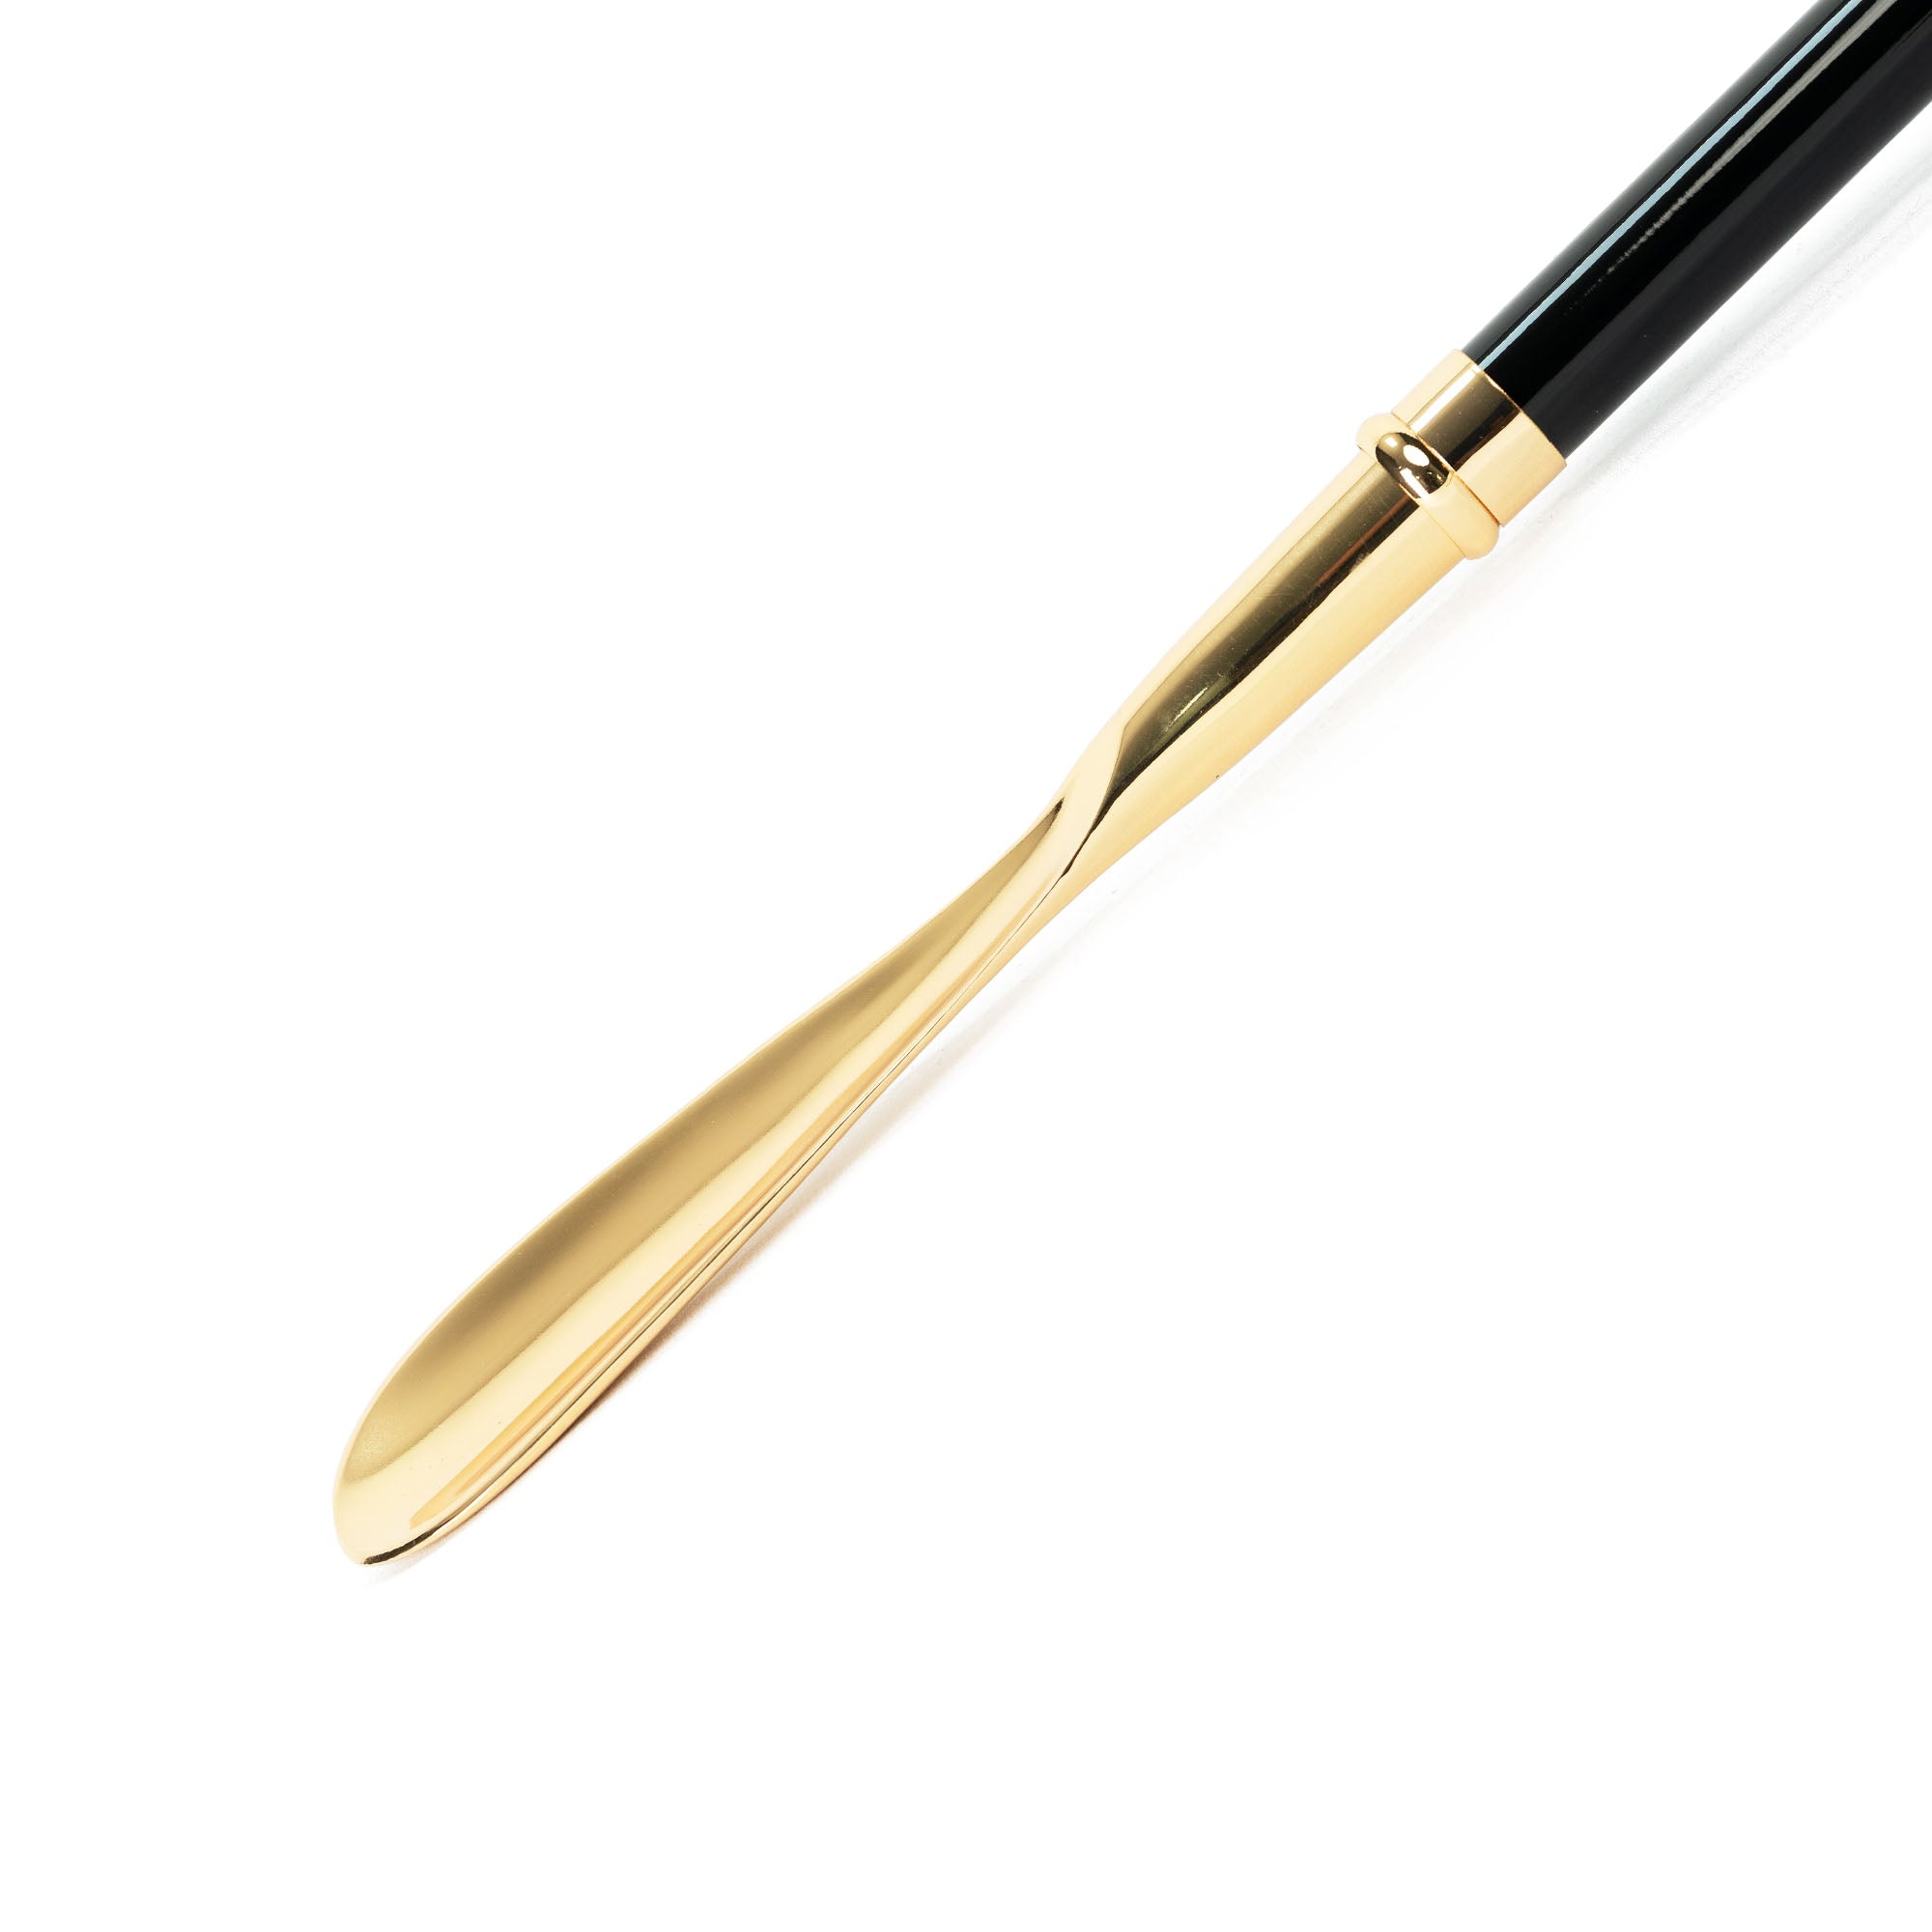 24K Gold-Plated Shoehorn with Owl Handle: Artistry Unleashed